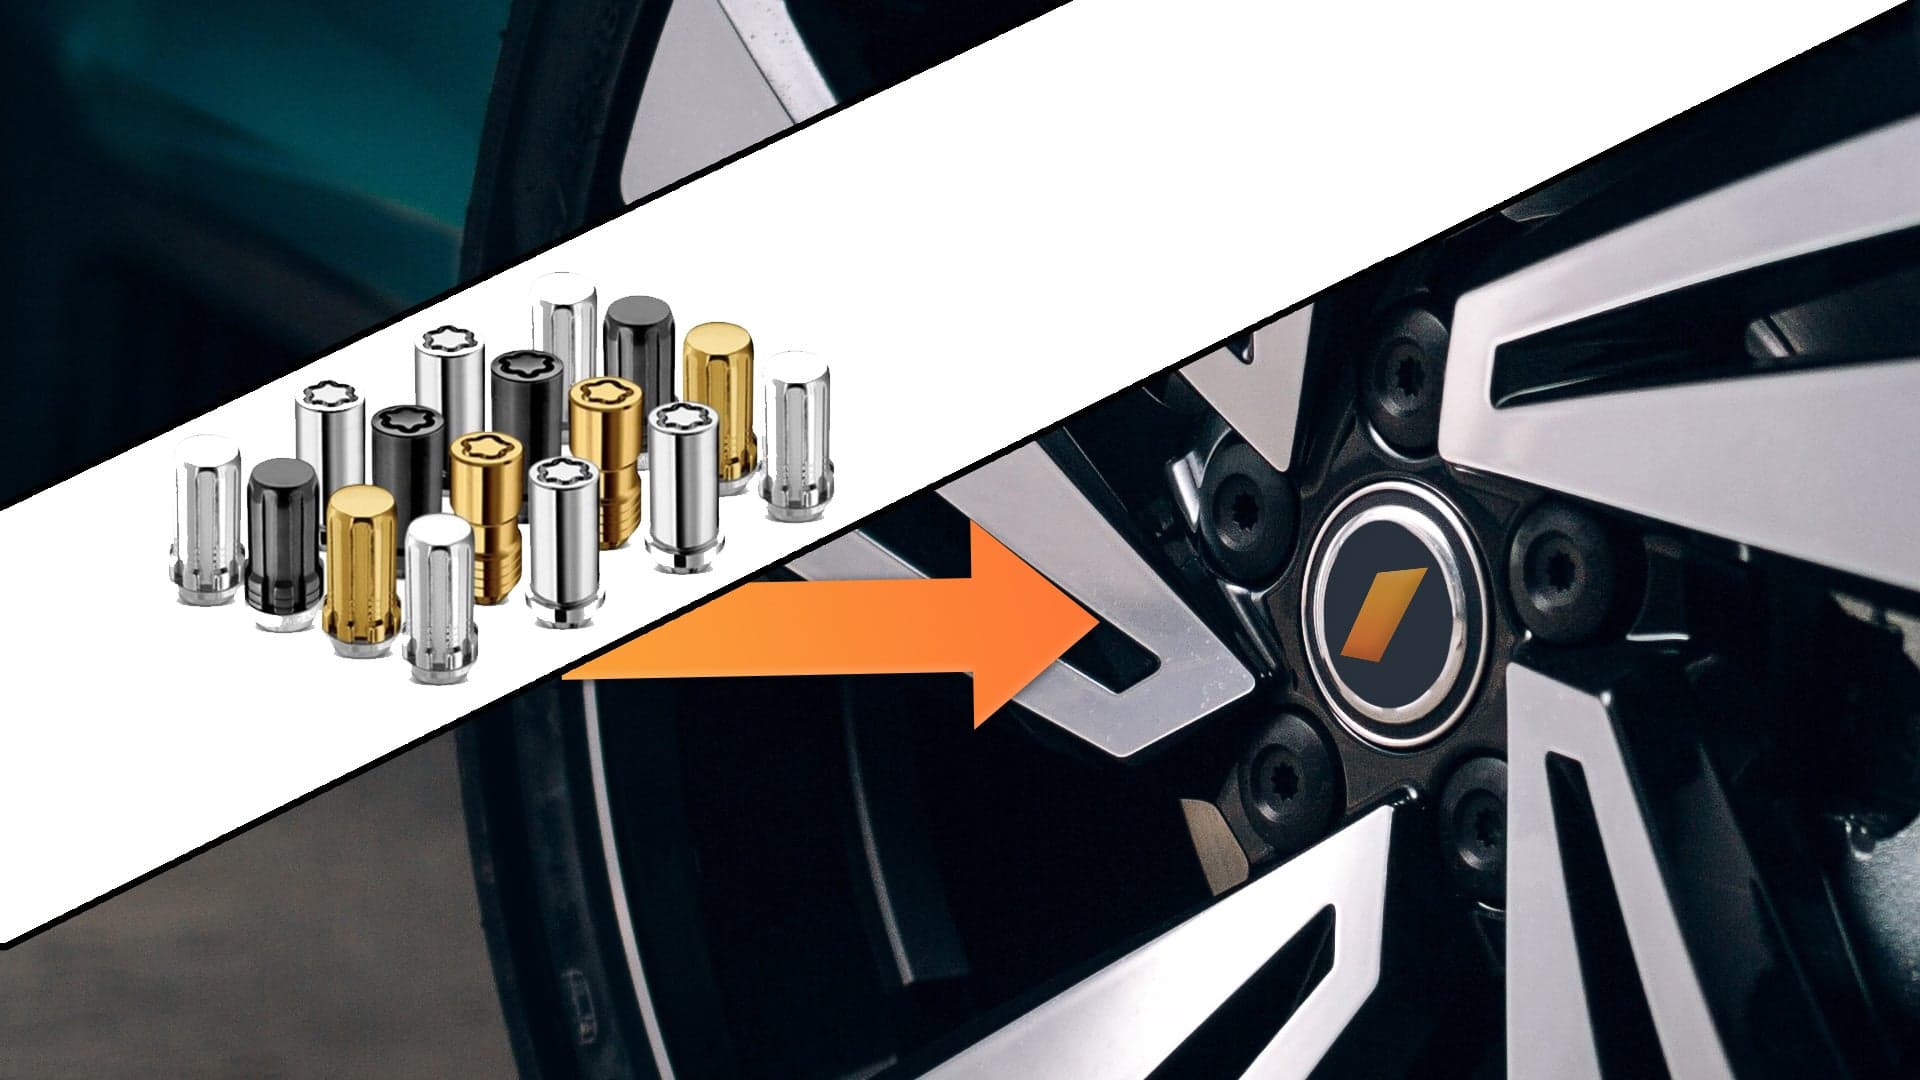 The Best Locking Wheel Lugs to Keep Your Wheels Safe and Secure